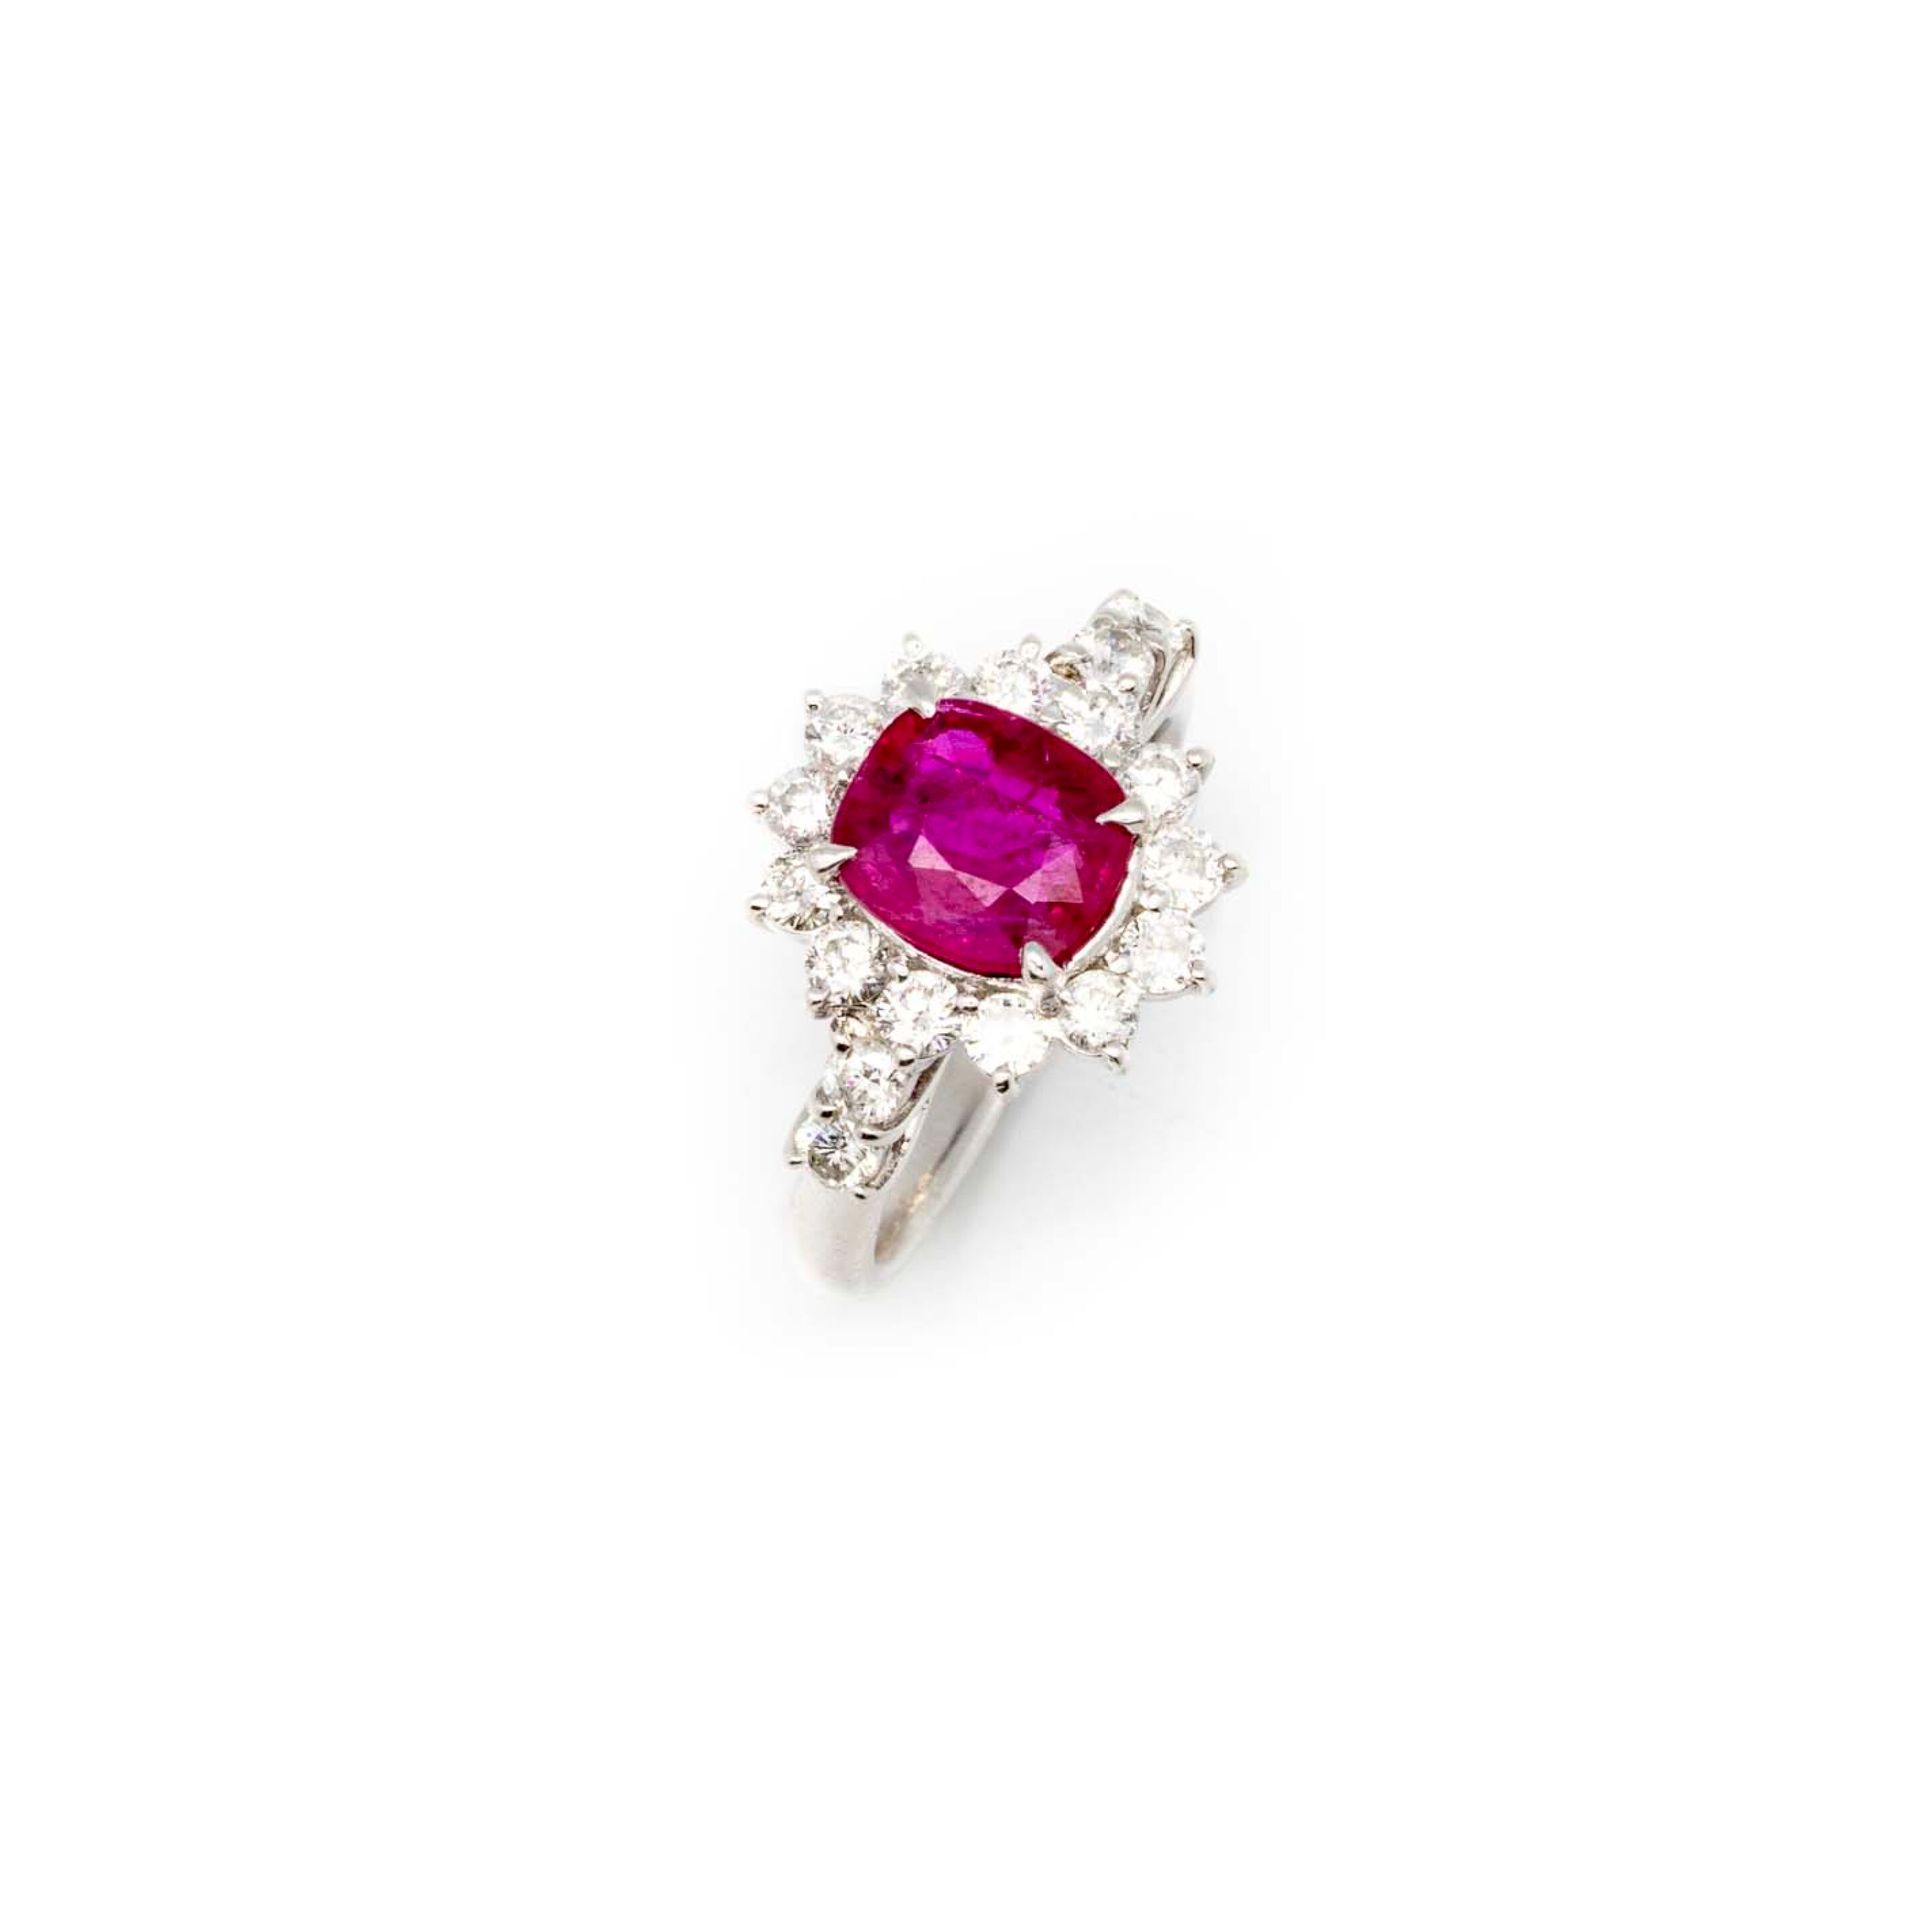 Null White gold ring set with a Burmese ruby weighing 1.72 ct. Surrounded by dia&hellip;